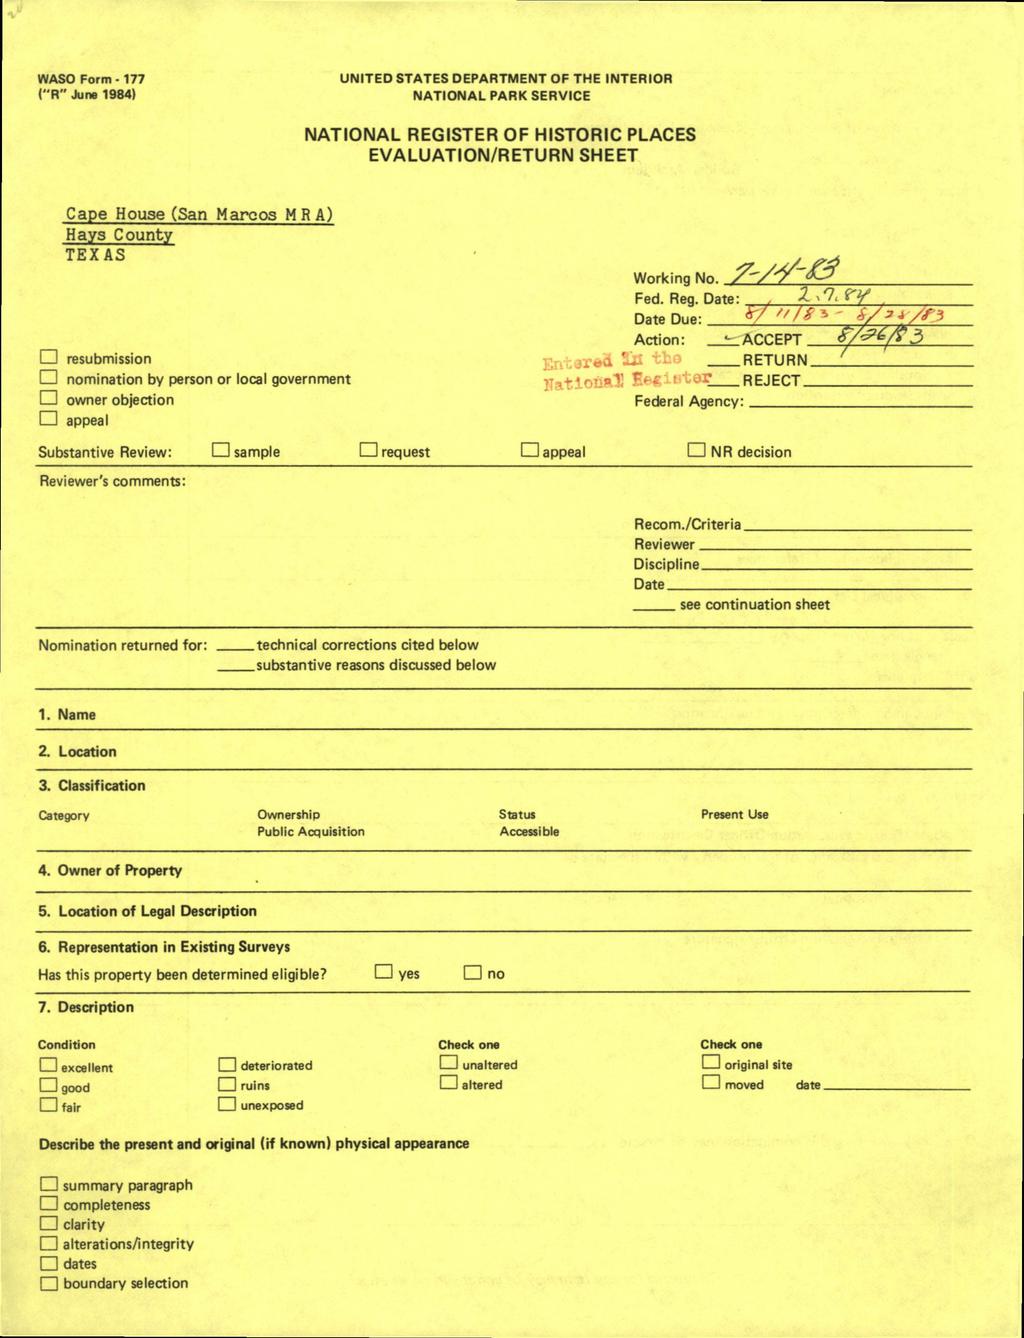 WASO Form - 177 ("R" June 1984) UNITED STATES DEPARTMENT OF THE INTERIOR NATIONAL PARK SERVICE NATIONAL REGISTER OF HISTORIC PLACES EVALUATION/RETURN SHEET Cape House (San Marcos MRA) Hays County